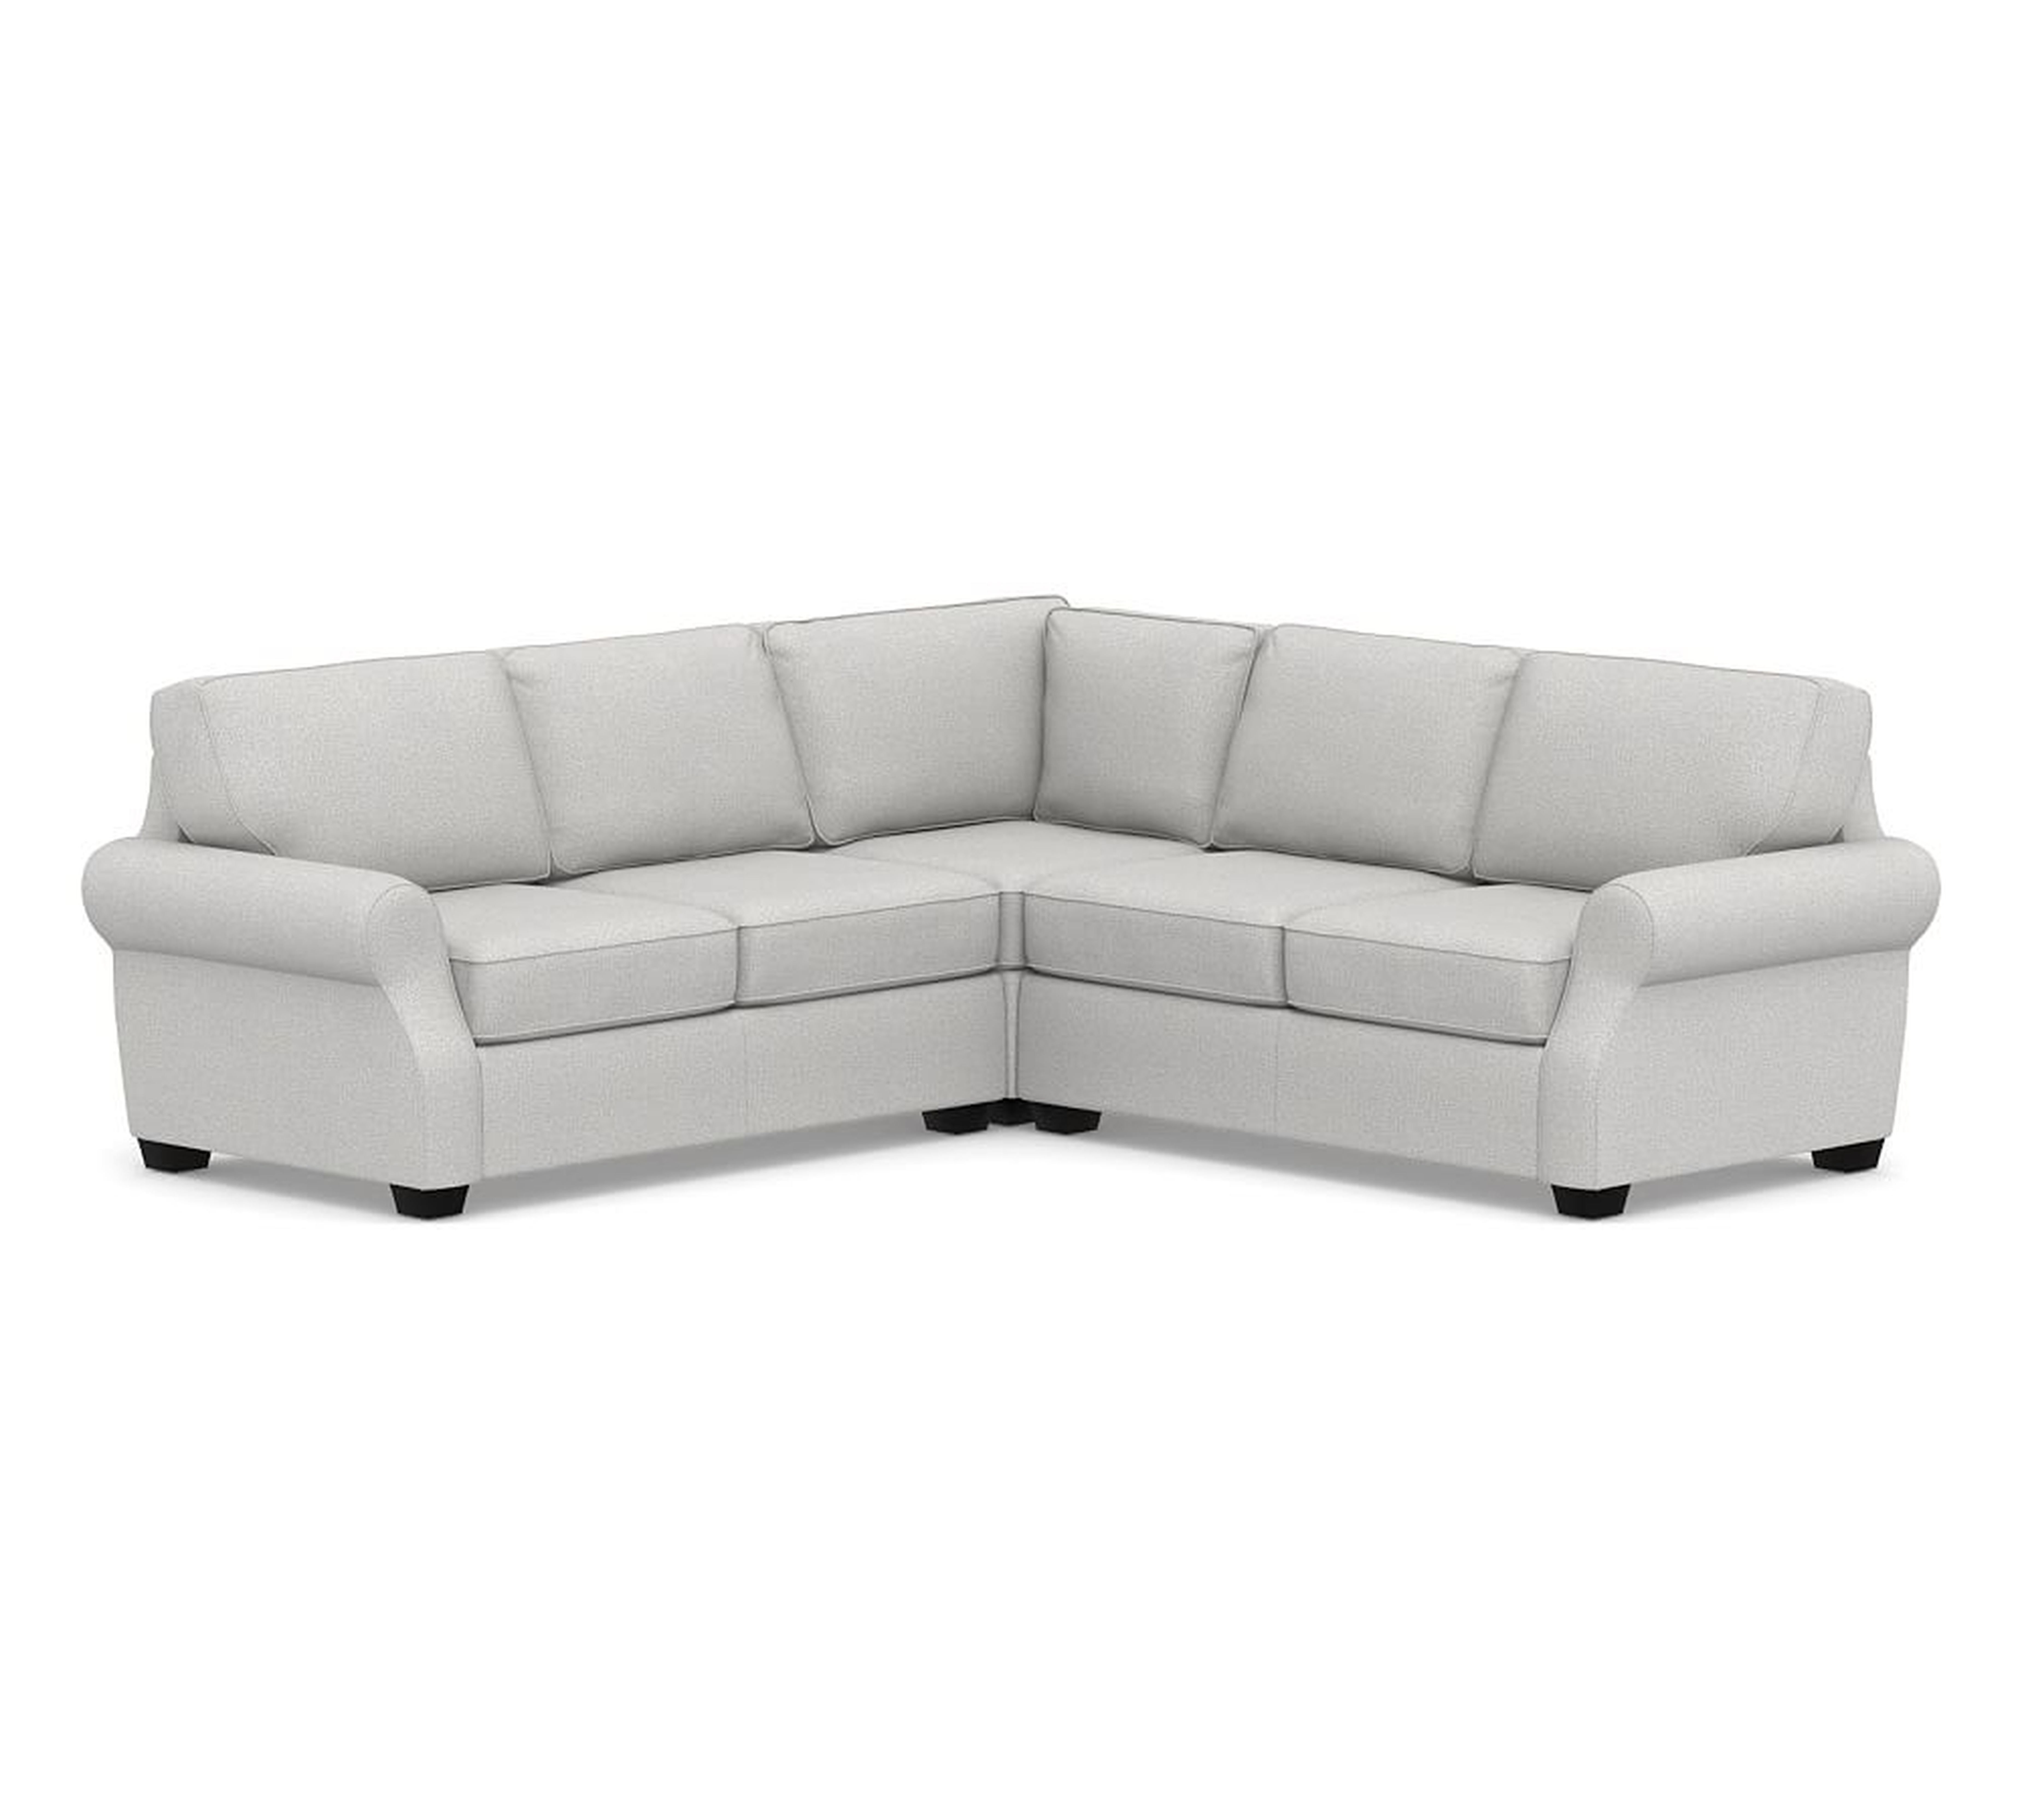 SoMa Fremont Roll Arm Upholstered 3-Piece L-Shaped Corner Sectional, Polyester Wrapped Cushions, Park Weave Ash - Pottery Barn